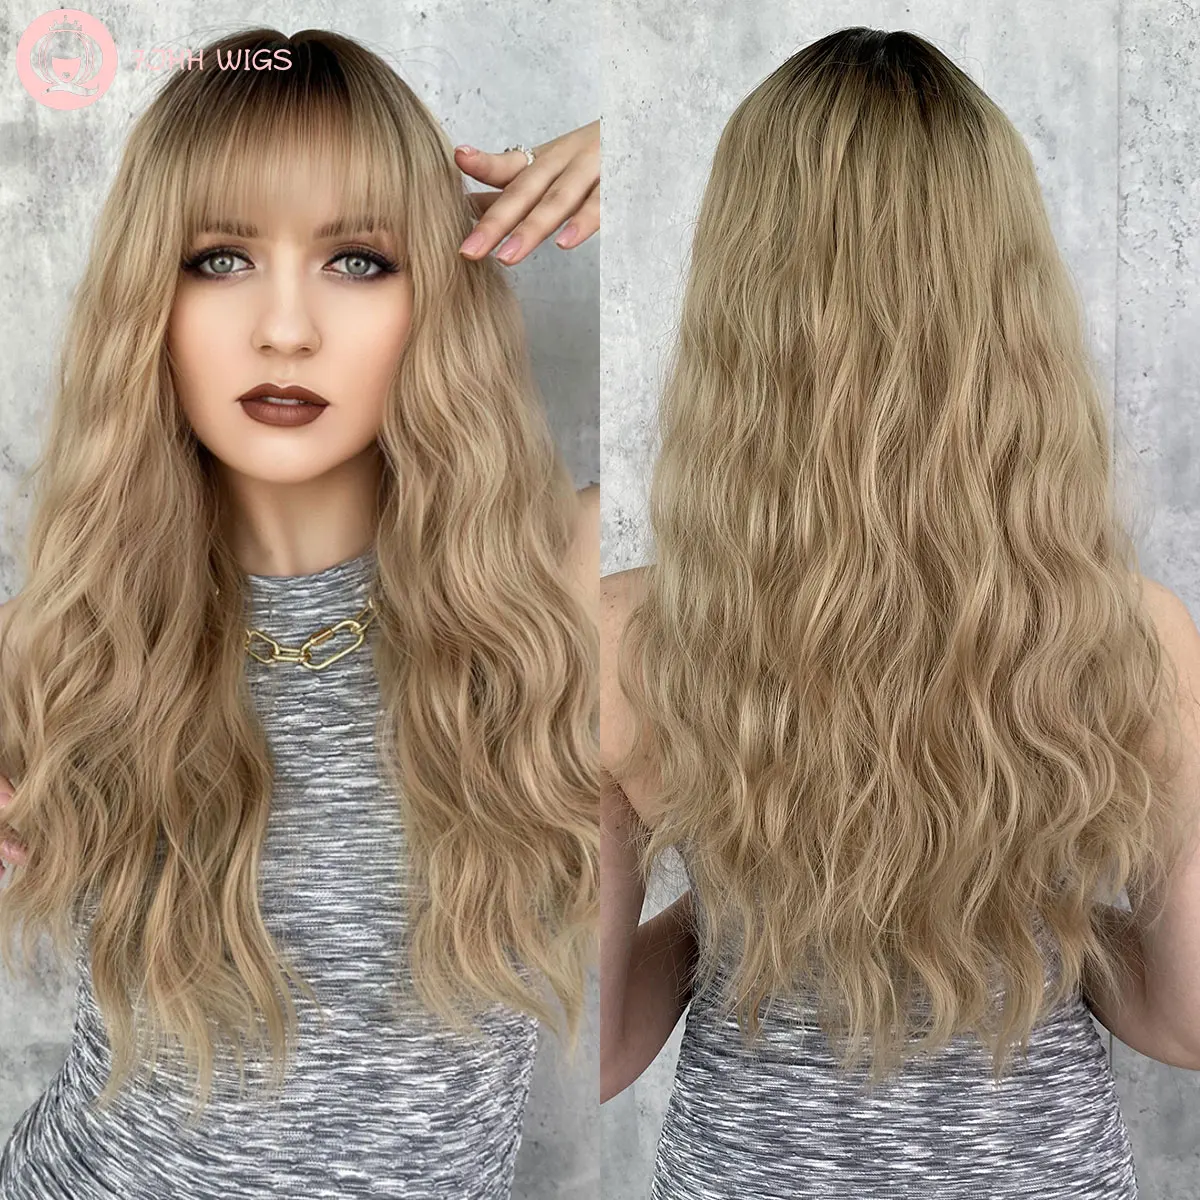 7JHH WIGS Ombre Blonde Wig with Bang Long Curly Hair Wigs Synthetic Natural Hair for Women 26 Inches Daily Used